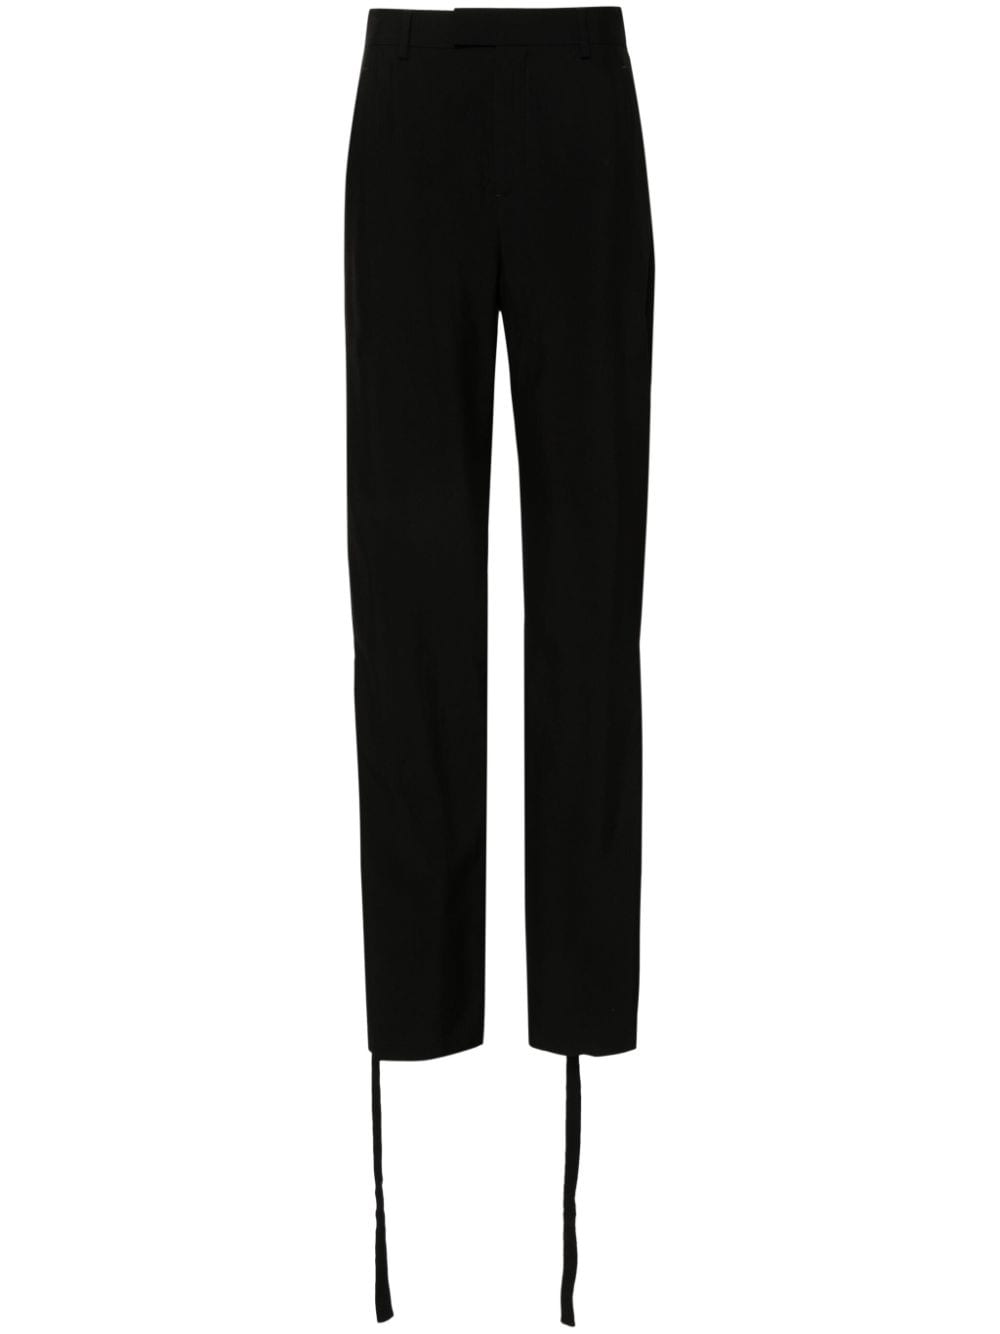 panelled-design trousers